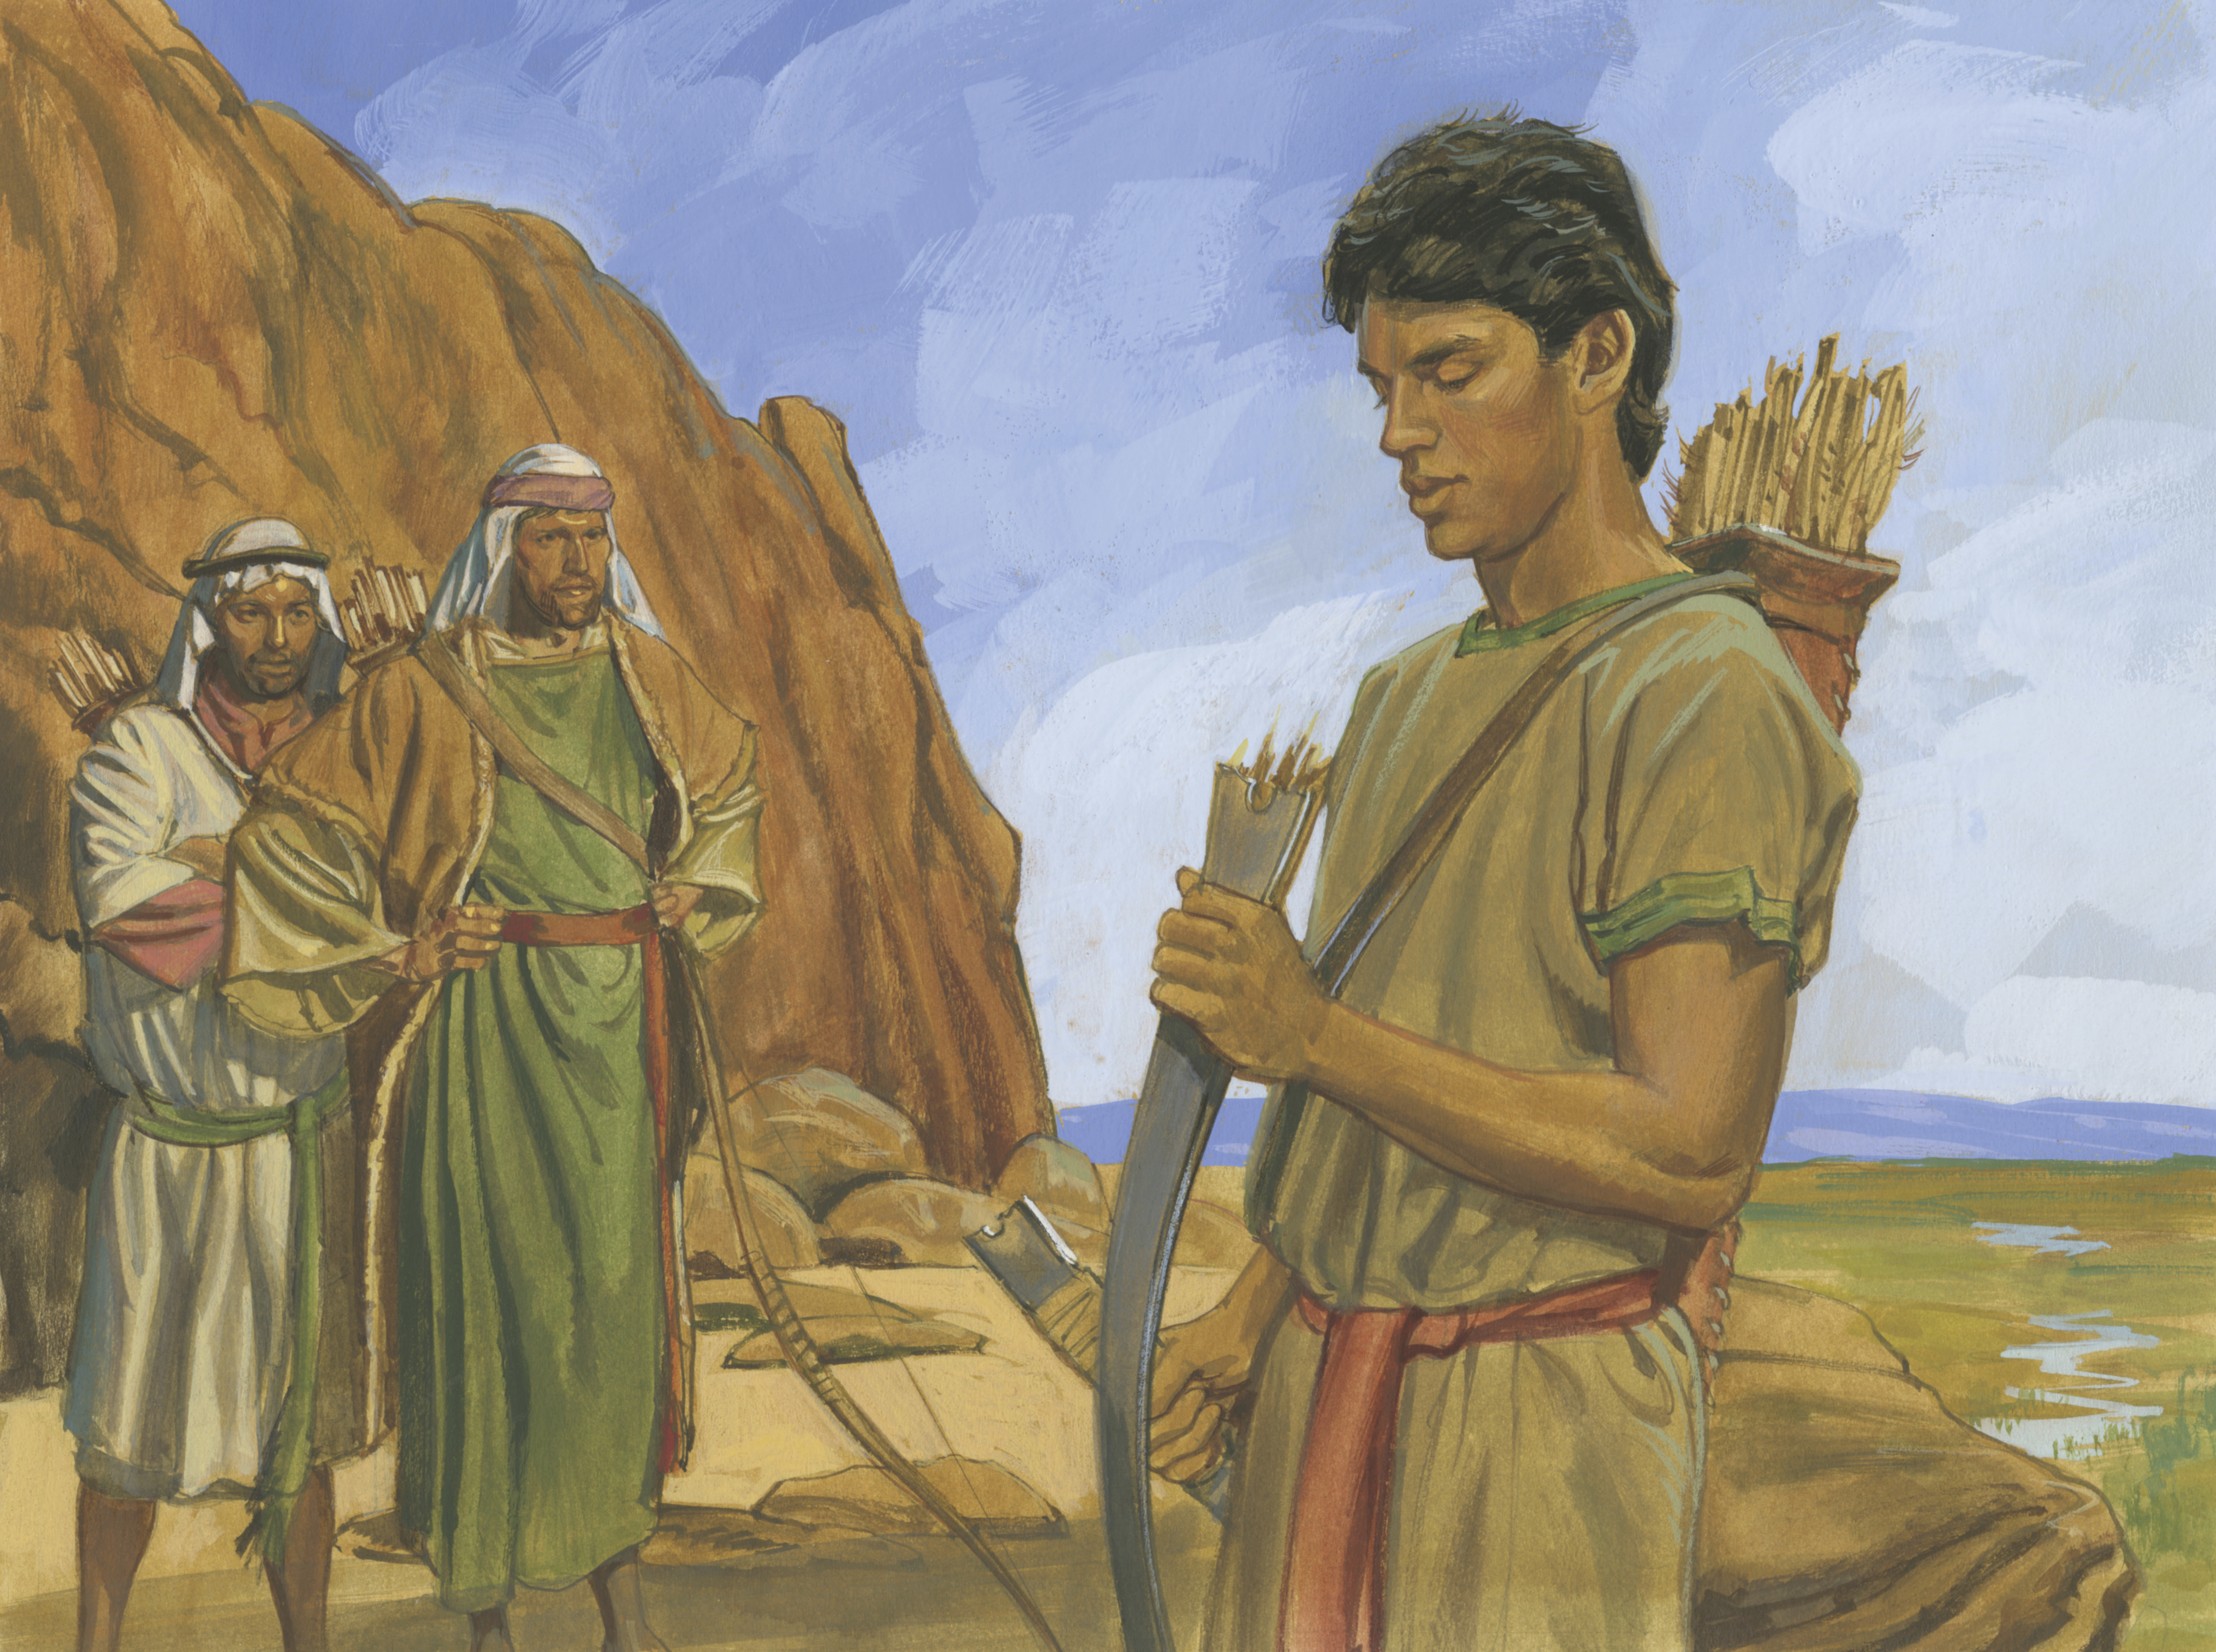 A painting by Jerry Thompson depicting Nephi and his broken bow; Primary manual 4-16